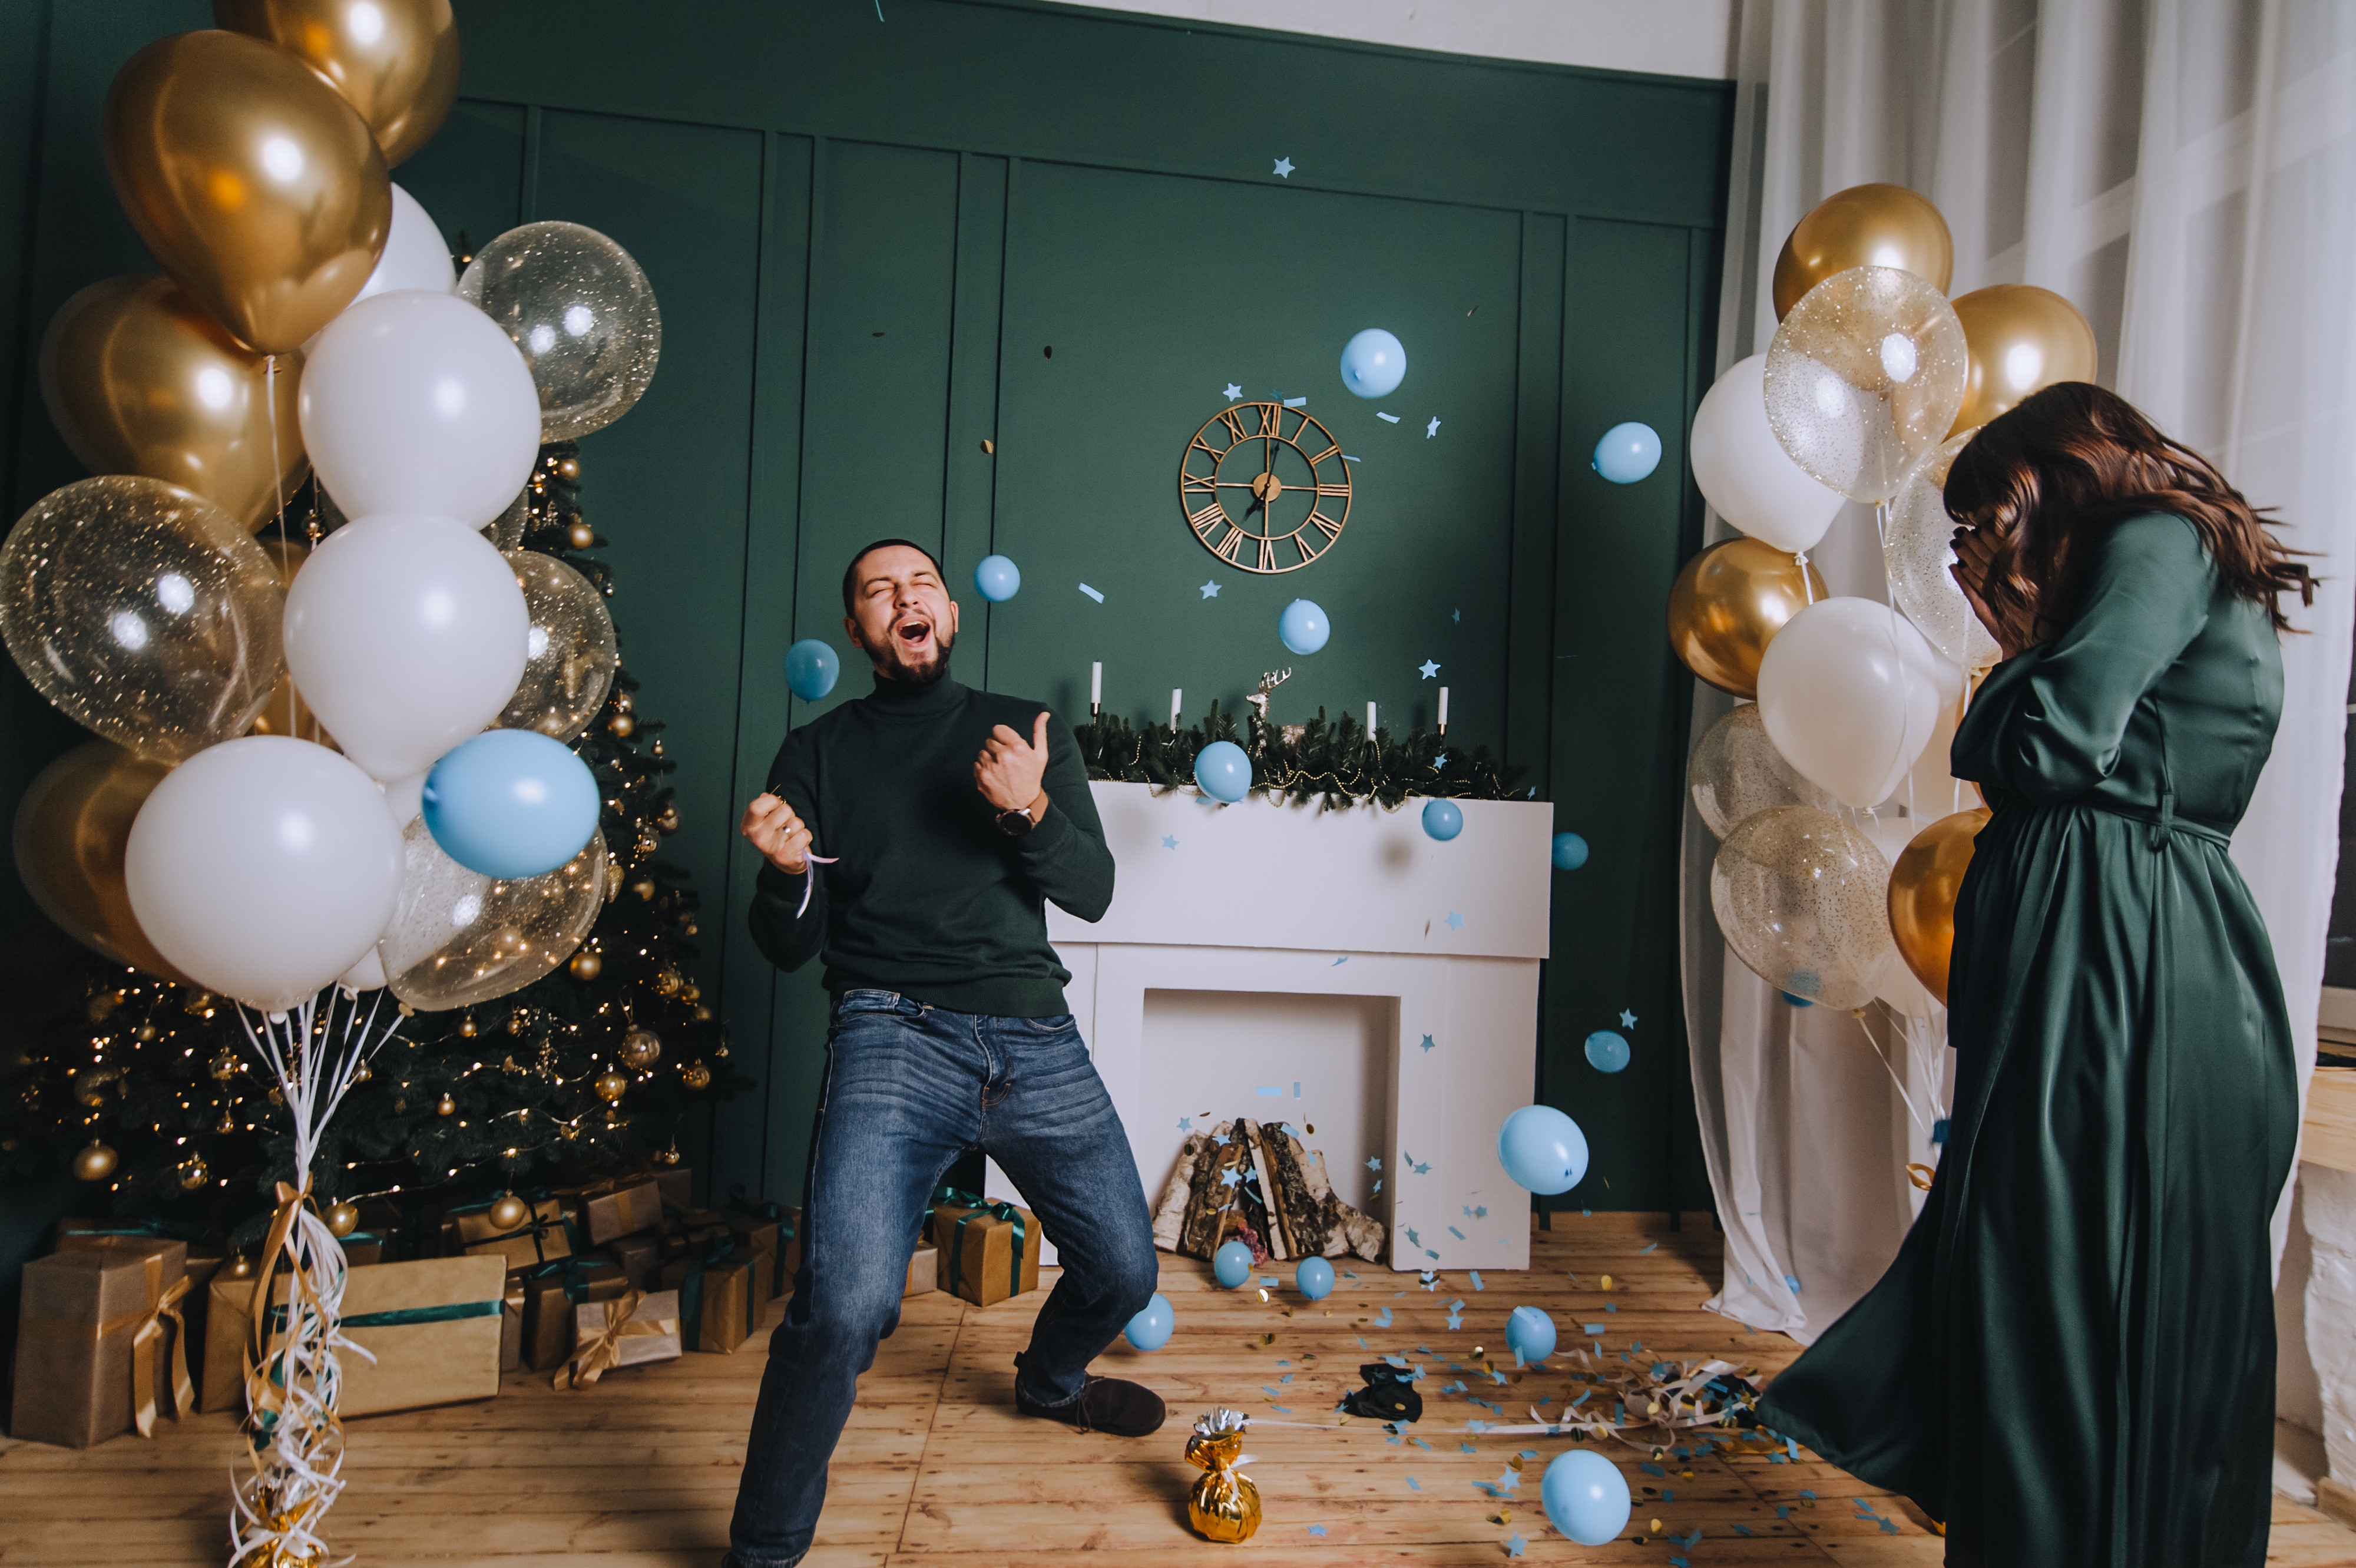 A man surrounded by blue balloons excitedly celebrating | Source: Shutterstock